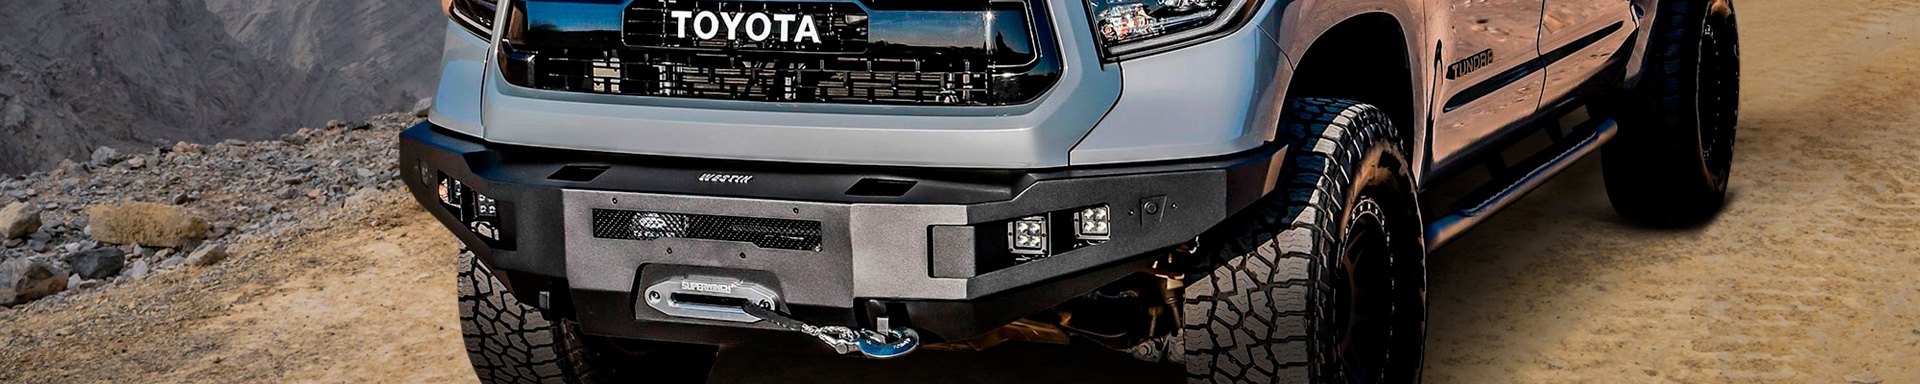 Pro-Series Bumpers Are Now Available for Toyota Tacoma & Tundra